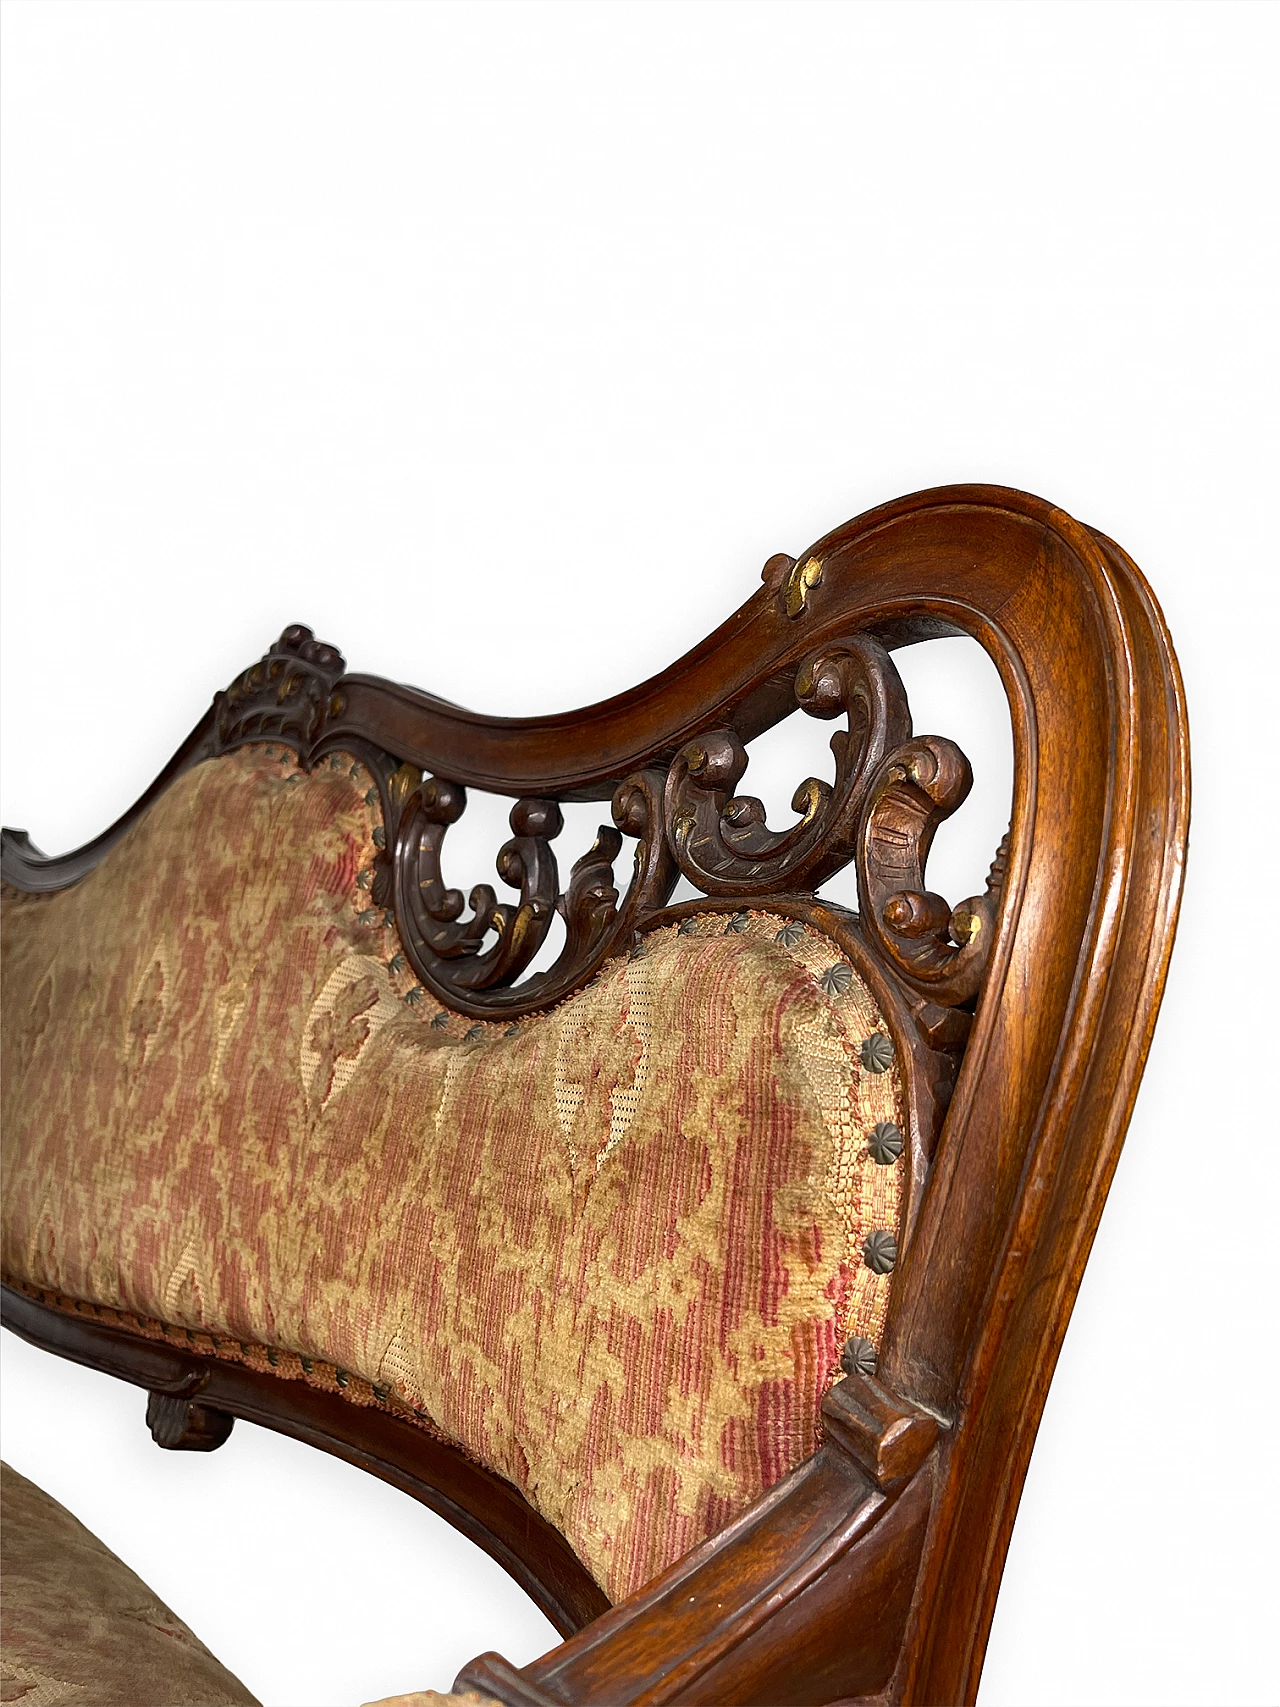 Rocaille-patterned wooden sofa, early 20th century 16